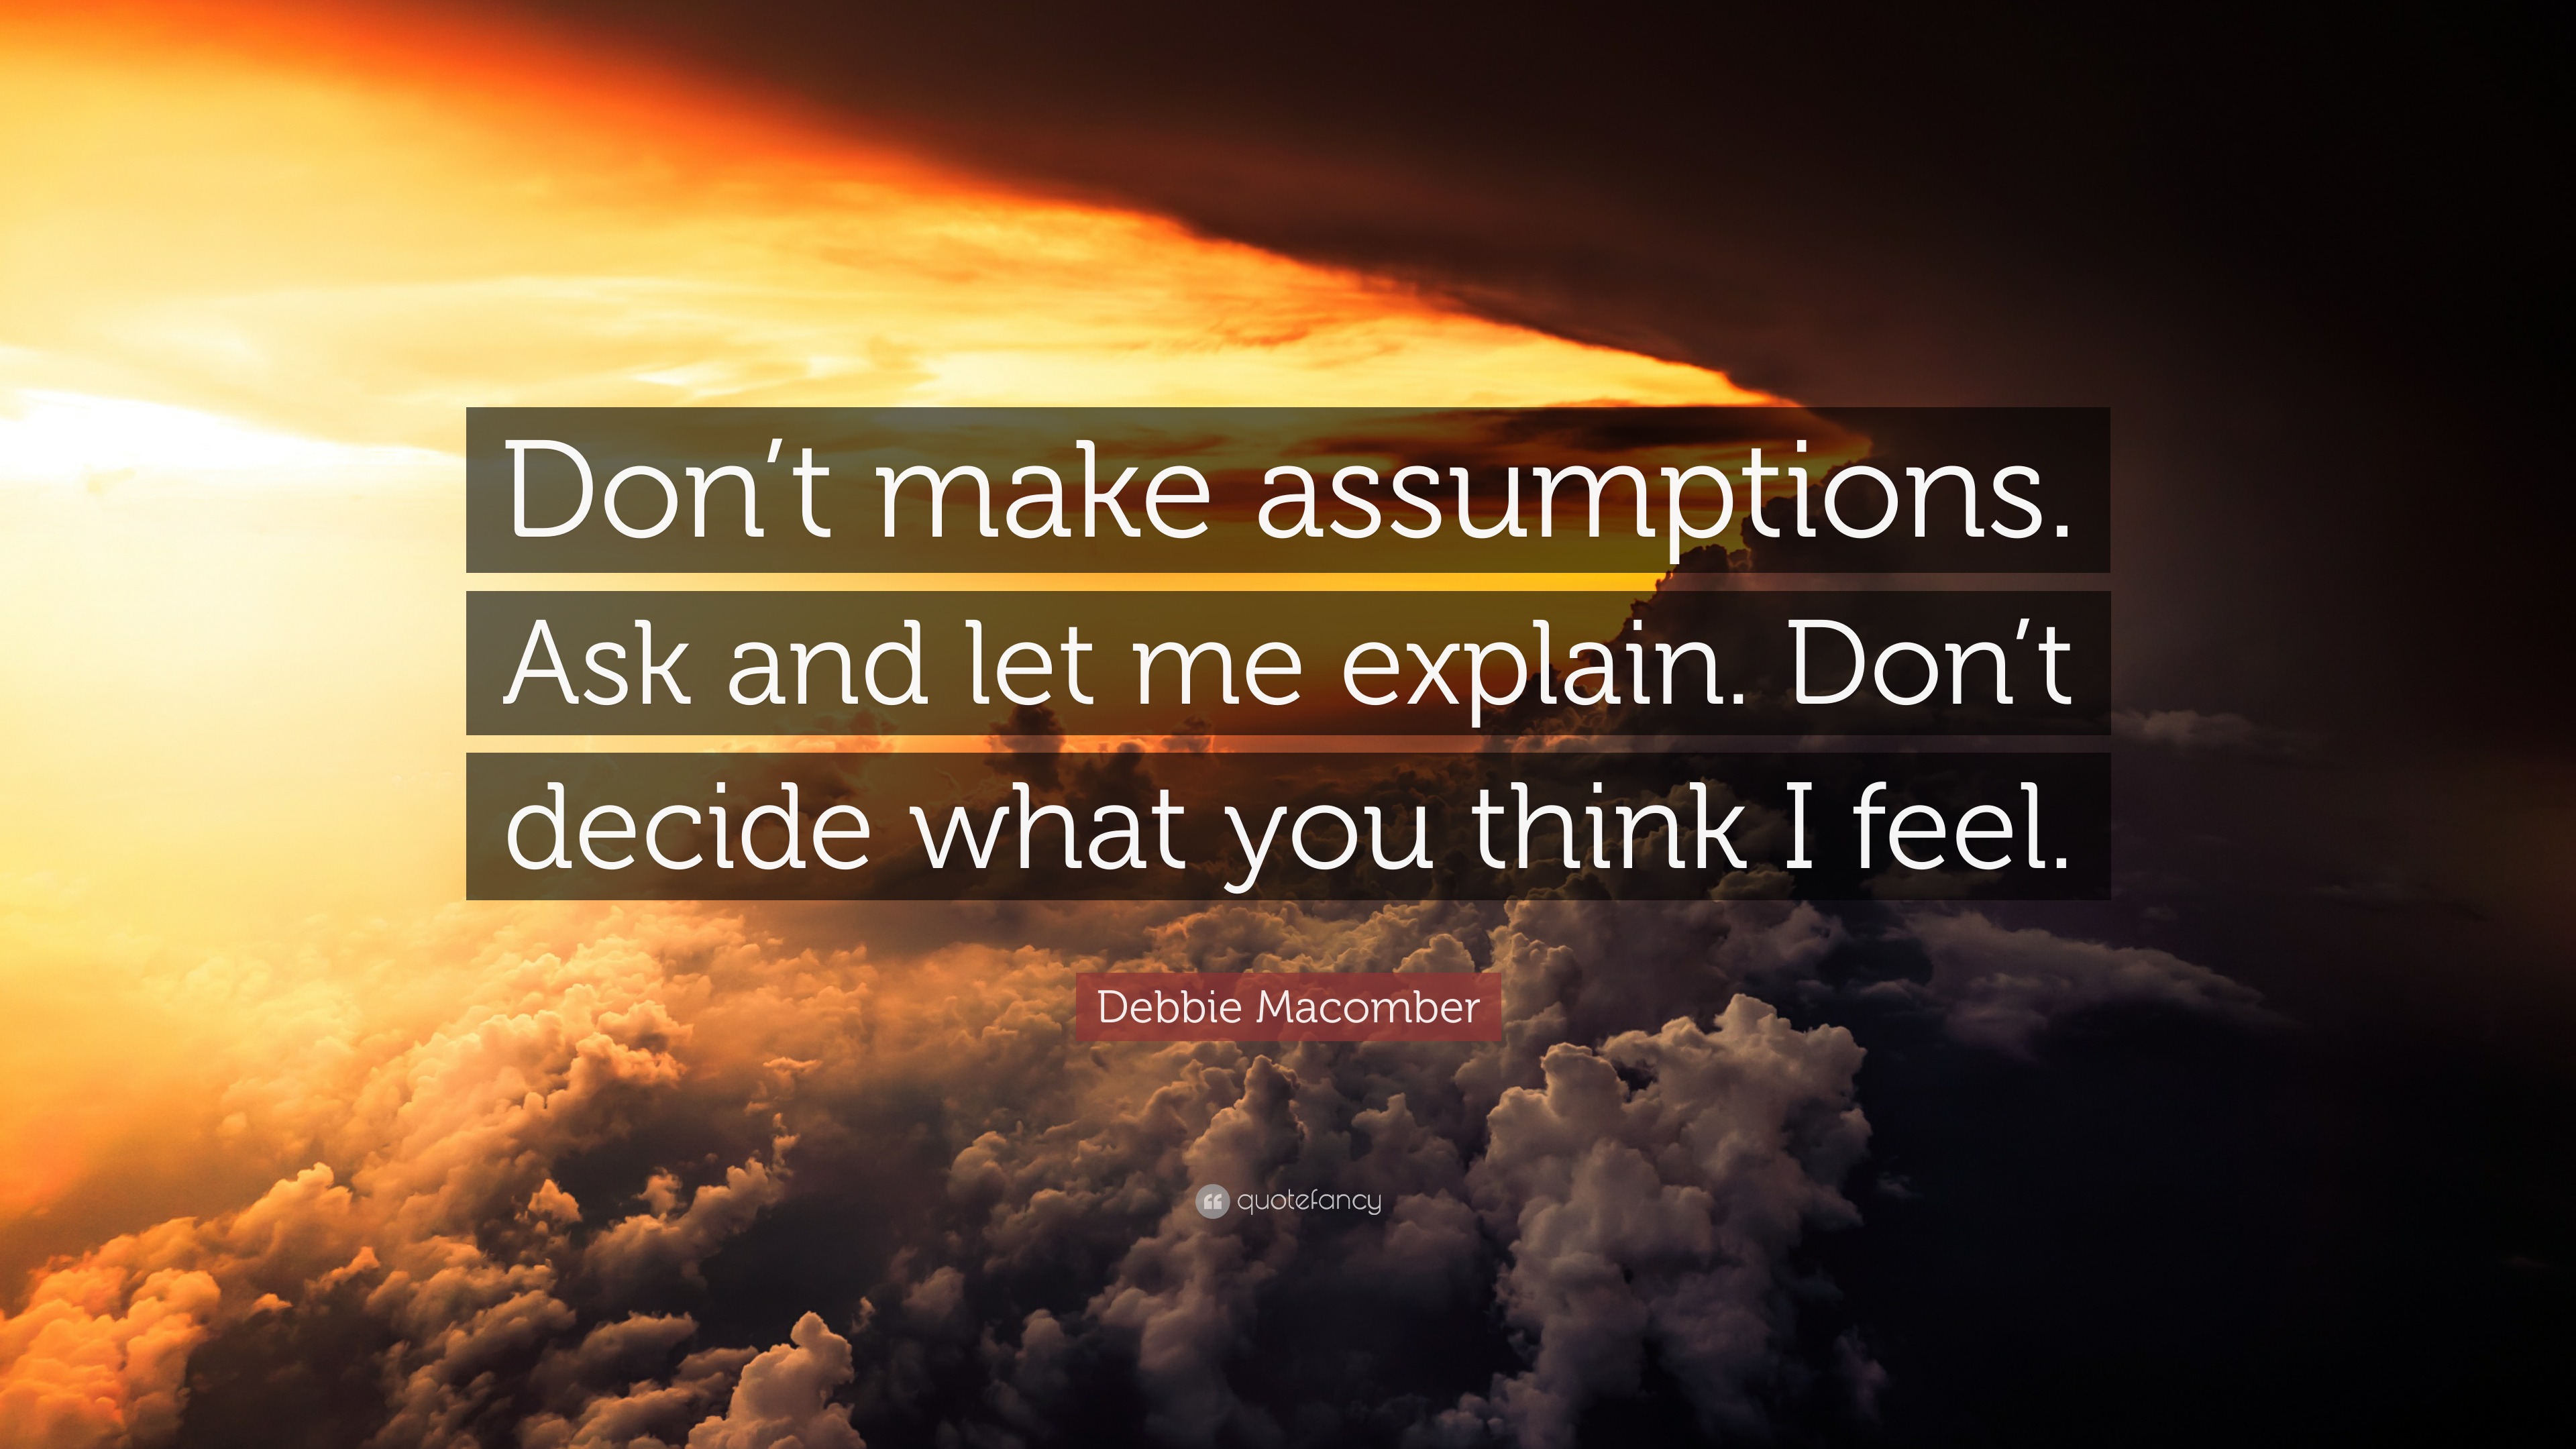 Debbie Macomber Quote: “Don't make assumptions. Ask and let me explain.  Don't decide what